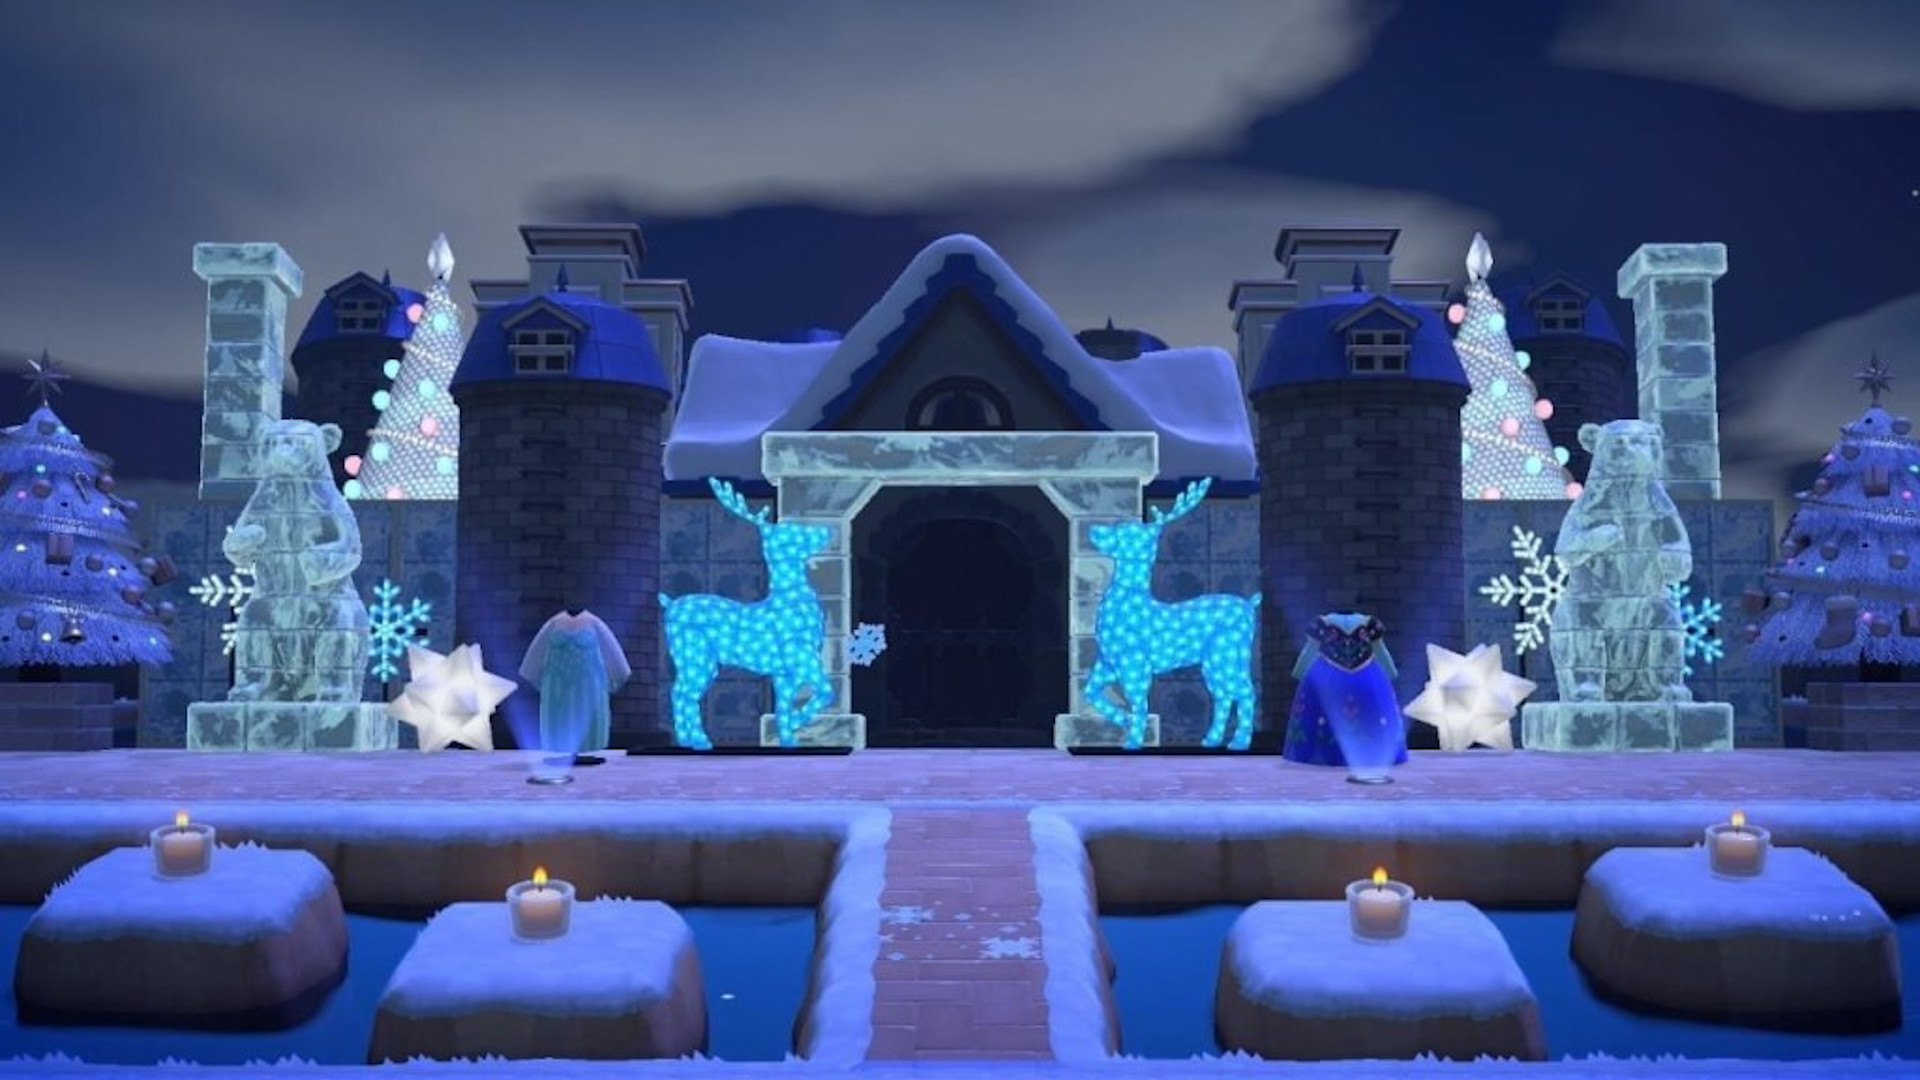 Animal Crossing New Horizons island ideas: A winter wonderland complete with ice deer in Animal Crossing.